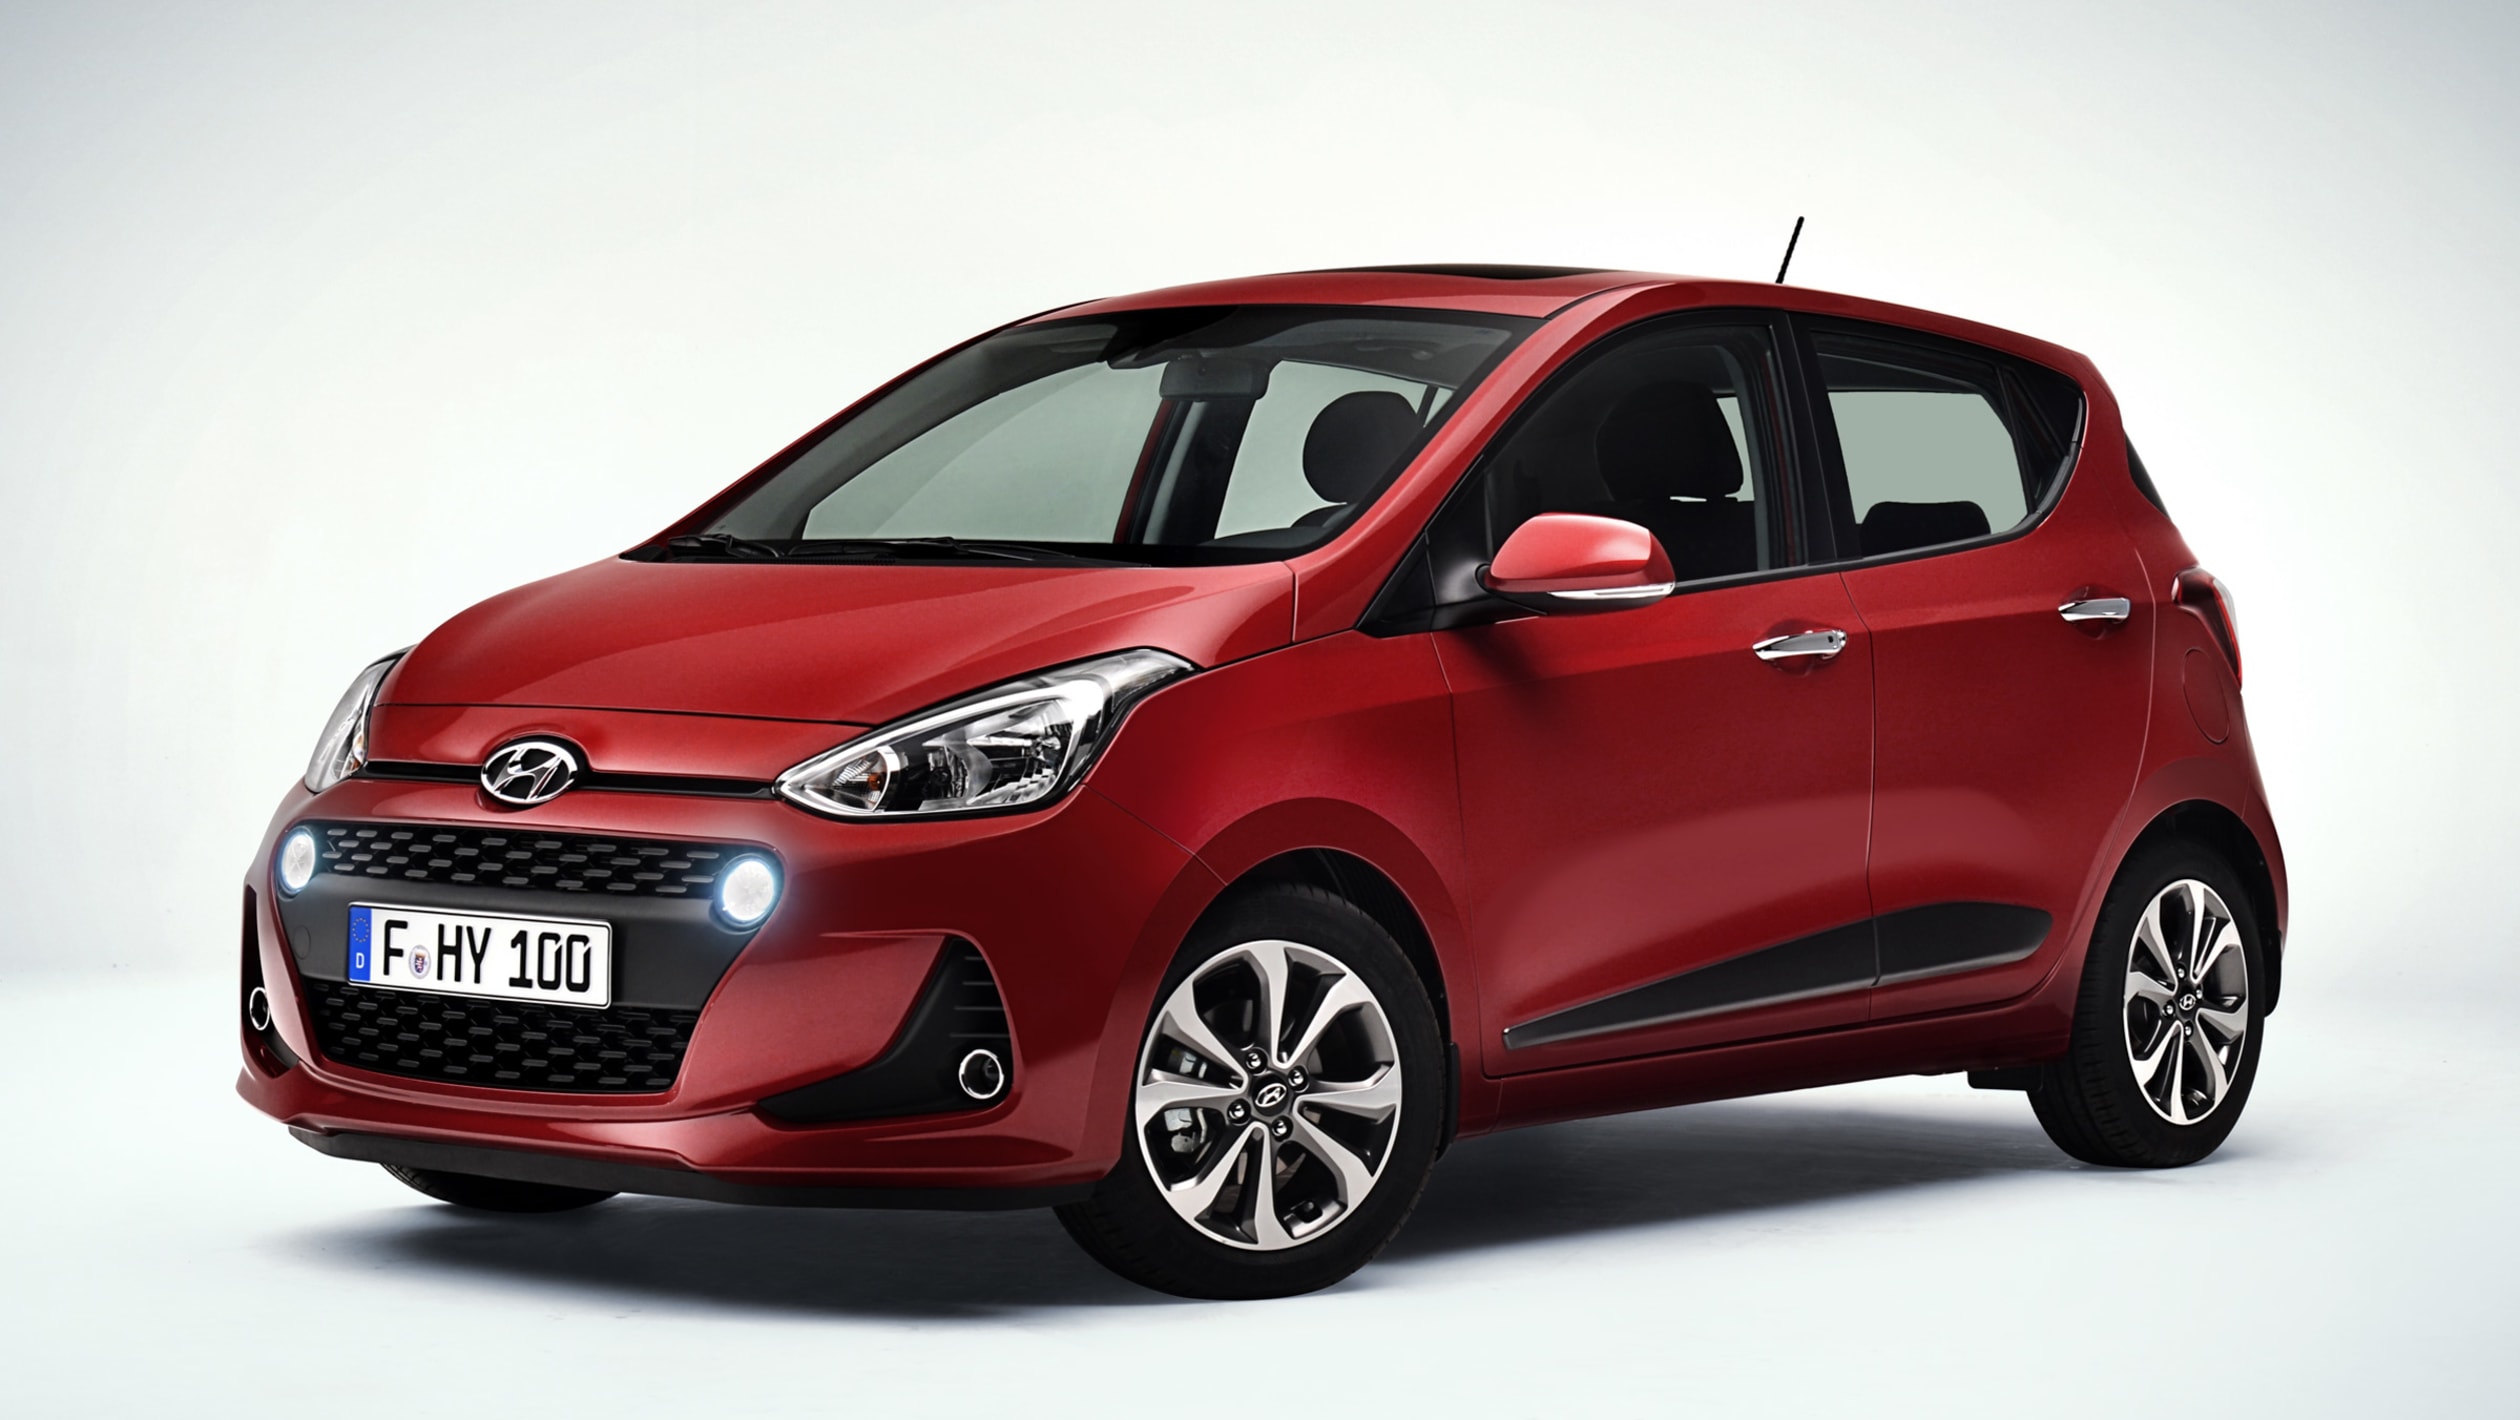 Hyundai i10 2016 facelift - pictures | Auto Express